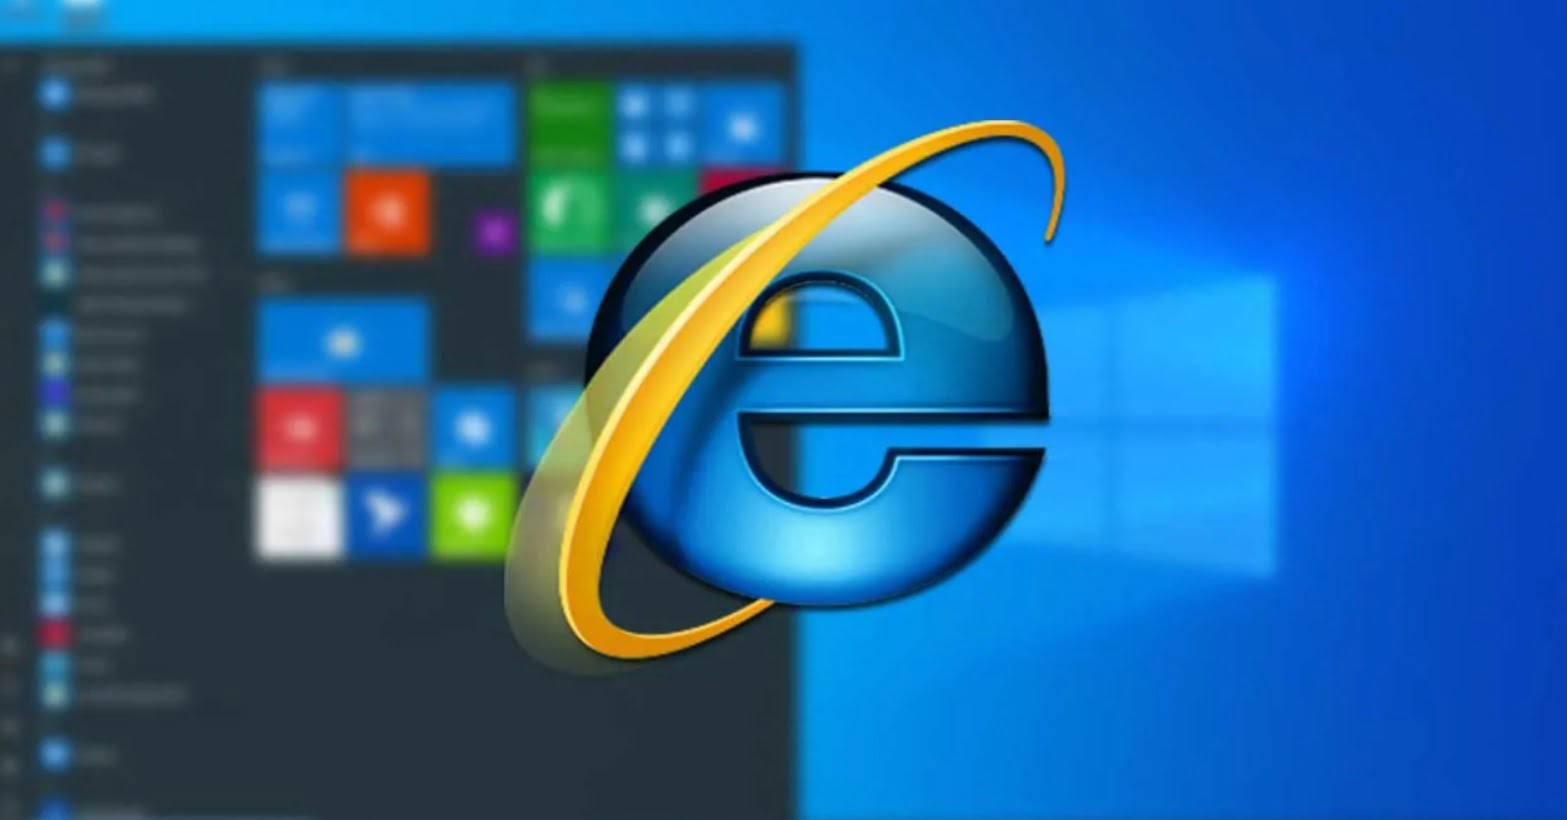 How to prevent Internet Explorer from redirecting to Microsoft Edge on incompatible sites?